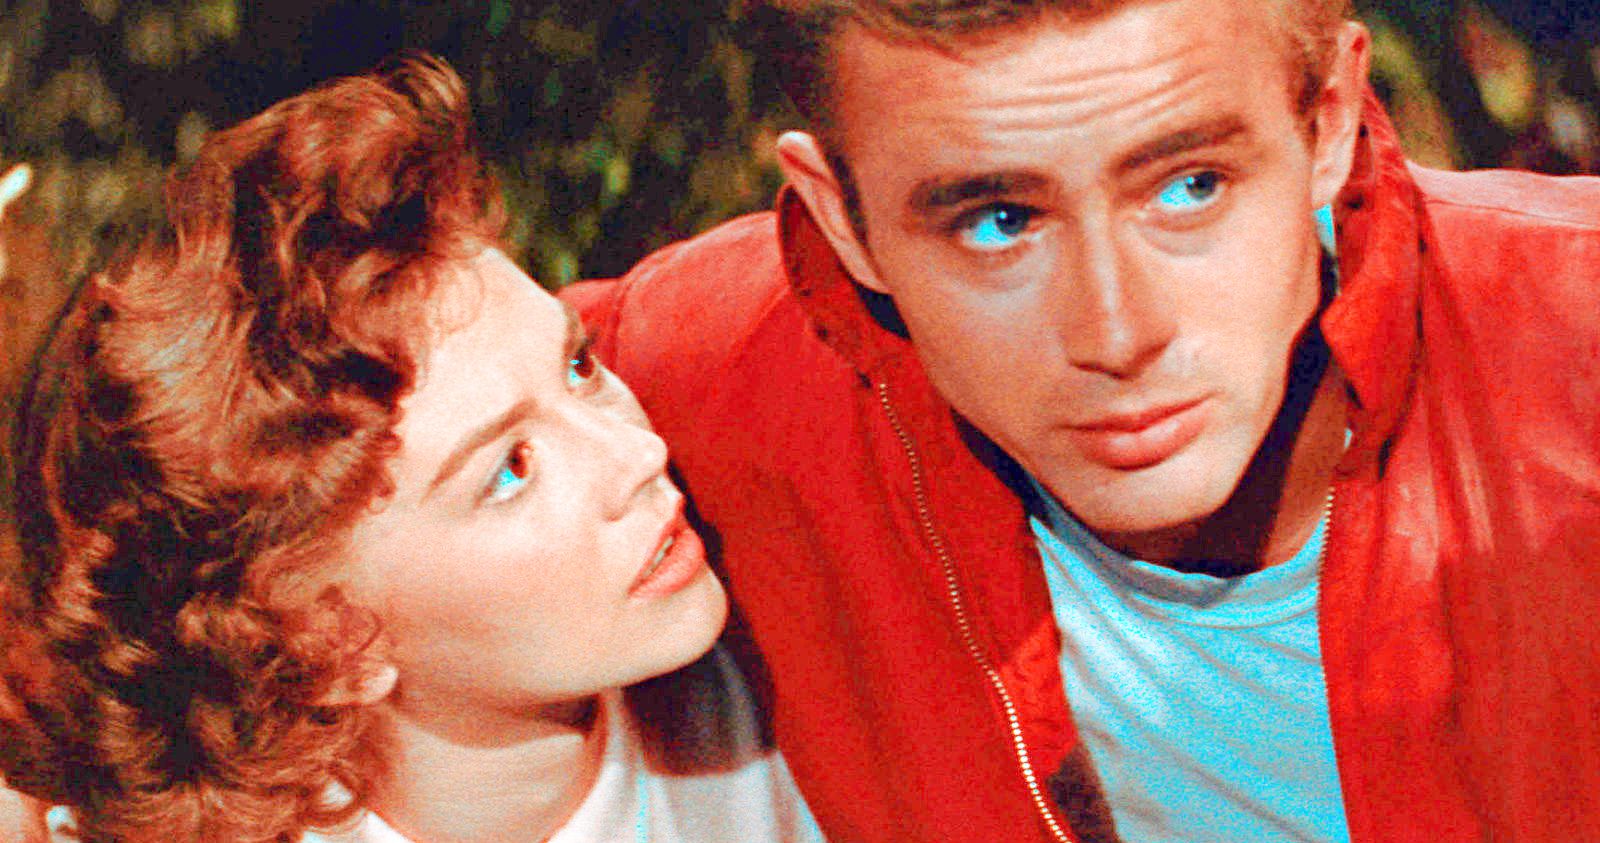 Are Any Rebel Without a Cause Cast Members Still Alive?